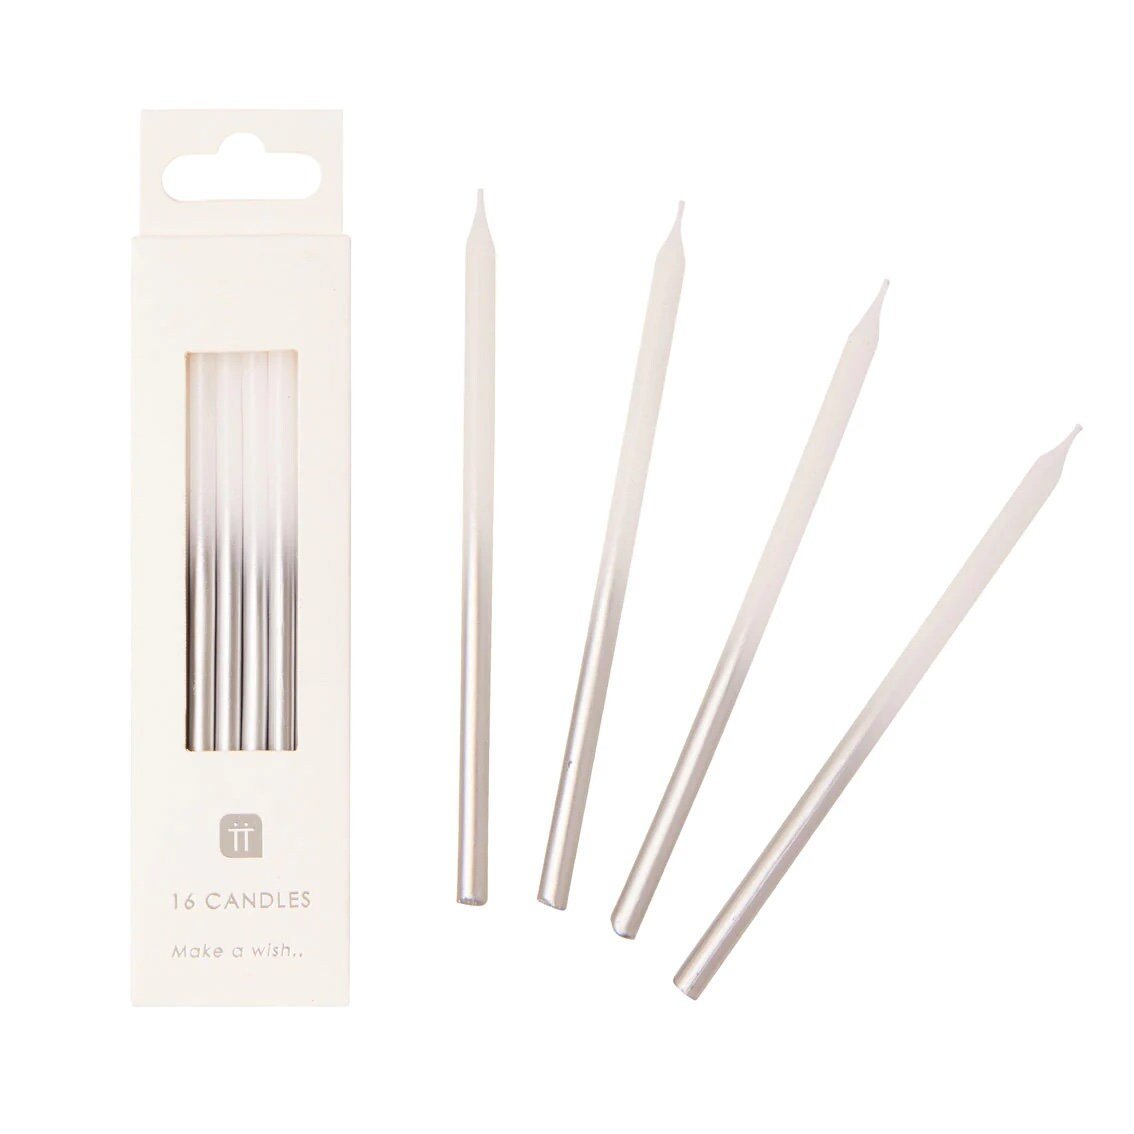 Silver & White Ombre Stick Candles 16ct - Stesha Party